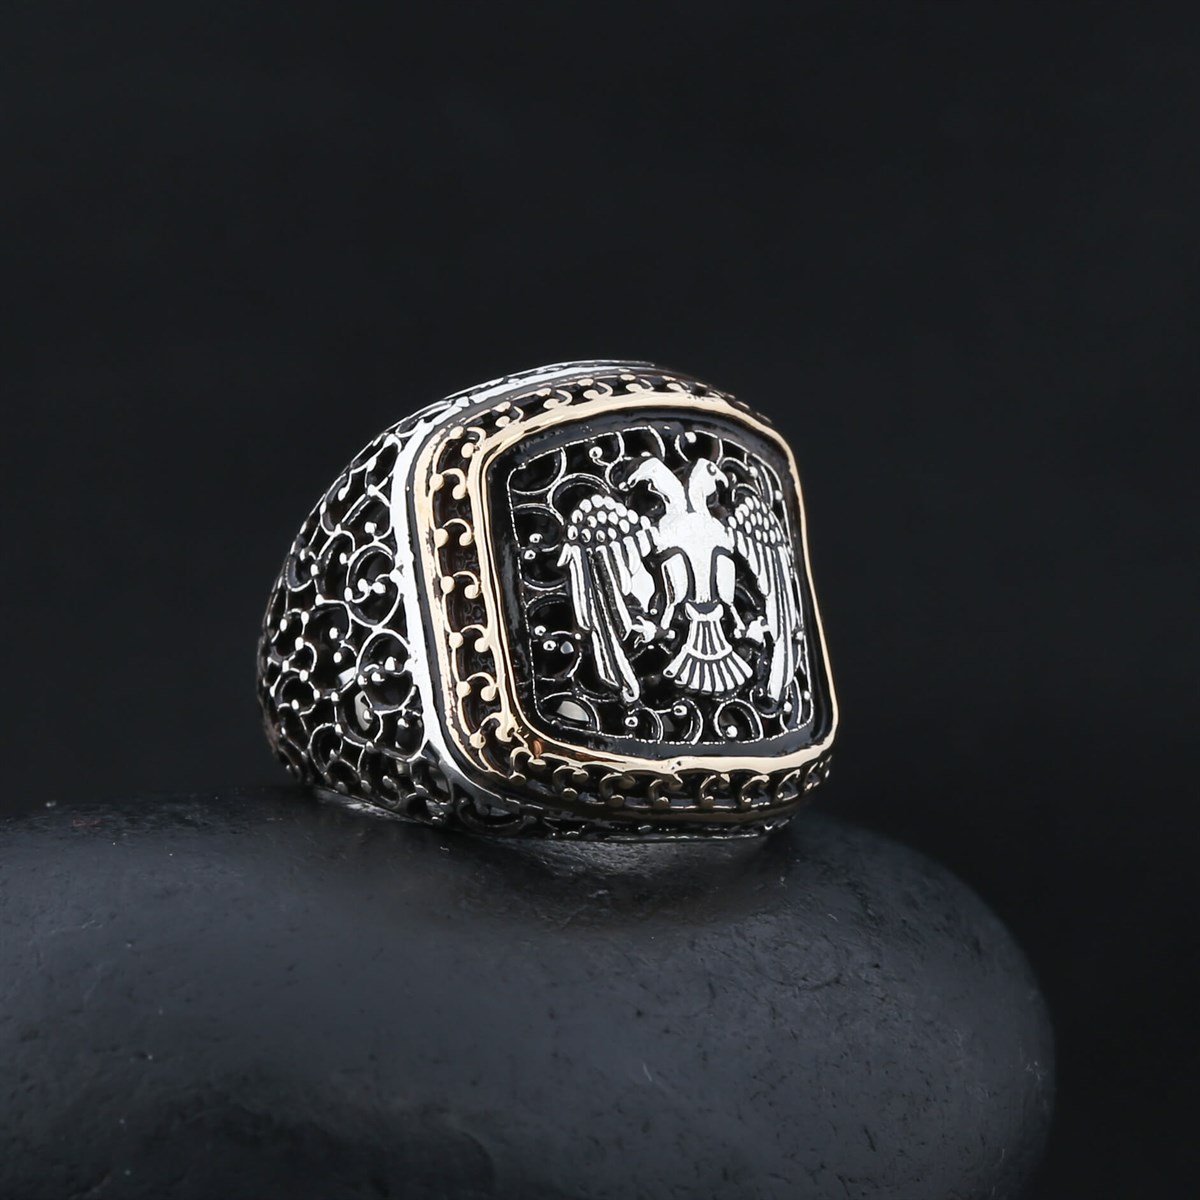 Double Headed Eagle Inlaid Sterling Silver Men's Ring